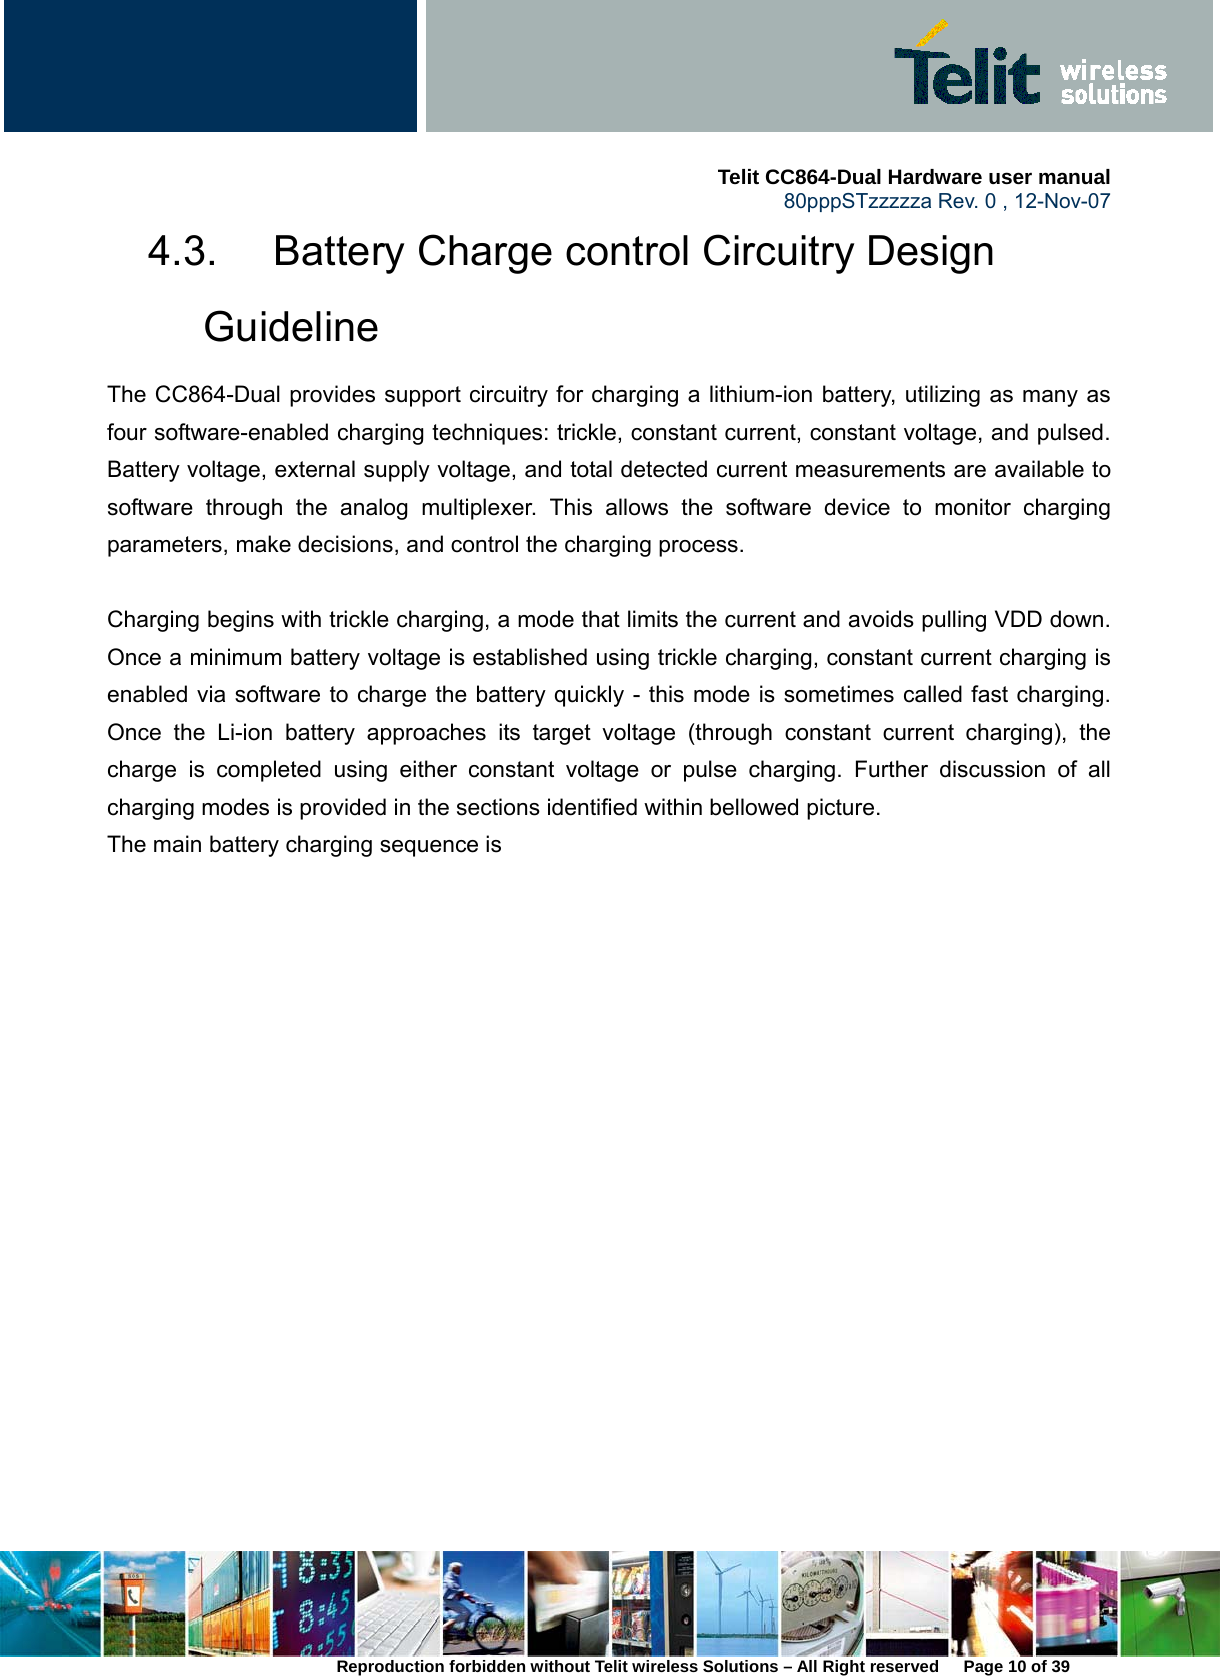     Telit CC864-Dual Hardware user manual   80pppSTzzzzza Rev. 0 , 12-Nov-07 Reproduction forbidden without Telit wireless Solutions – All Right reserved      Page 10 of 39 4.3.  Battery Charge control Circuitry Design Guideline The CC864-Dual provides support circuitry for charging a lithium-ion battery, utilizing as many as four software-enabled charging techniques: trickle, constant current, constant voltage, and pulsed. Battery voltage, external supply voltage, and total detected current measurements are available to software through the analog multiplexer. This allows the software device to monitor charging parameters, make decisions, and control the charging process.     Charging begins with trickle charging, a mode that limits the current and avoids pulling VDD down. Once a minimum battery voltage is established using trickle charging, constant current charging is enabled via software to charge the battery quickly - this mode is sometimes called fast charging. Once the Li-ion battery approaches its target voltage (through constant current charging), the charge is completed using either constant voltage or pulse charging. Further discussion of all charging modes is provided in the sections identified within bellowed picture. The main battery charging sequence is    